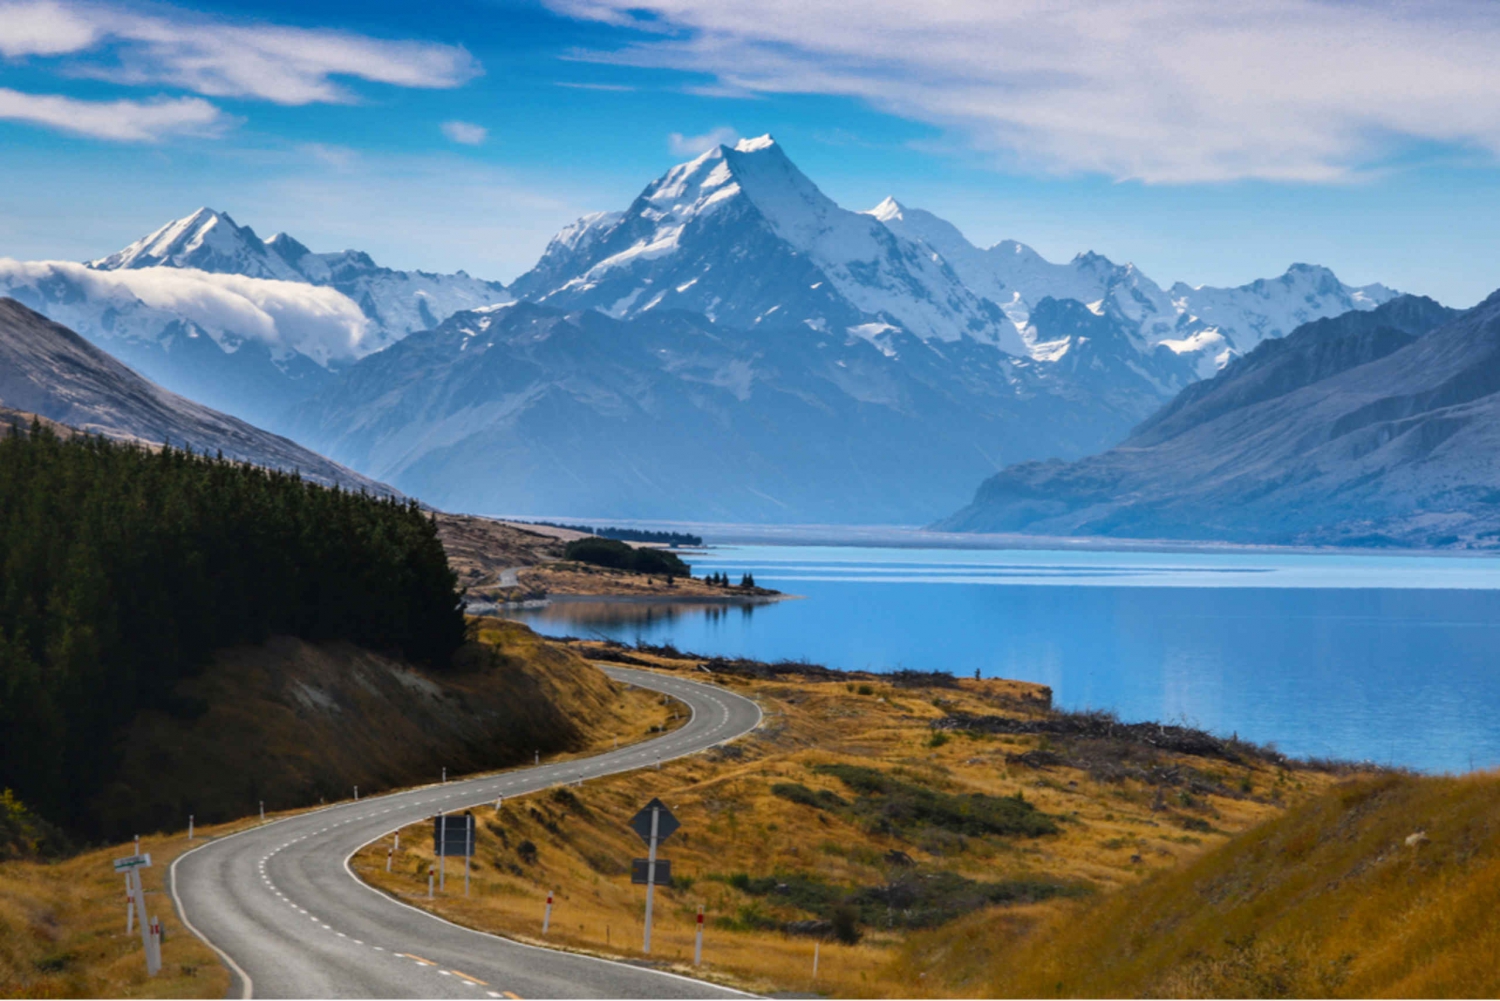 mt cook day tour from queenstown